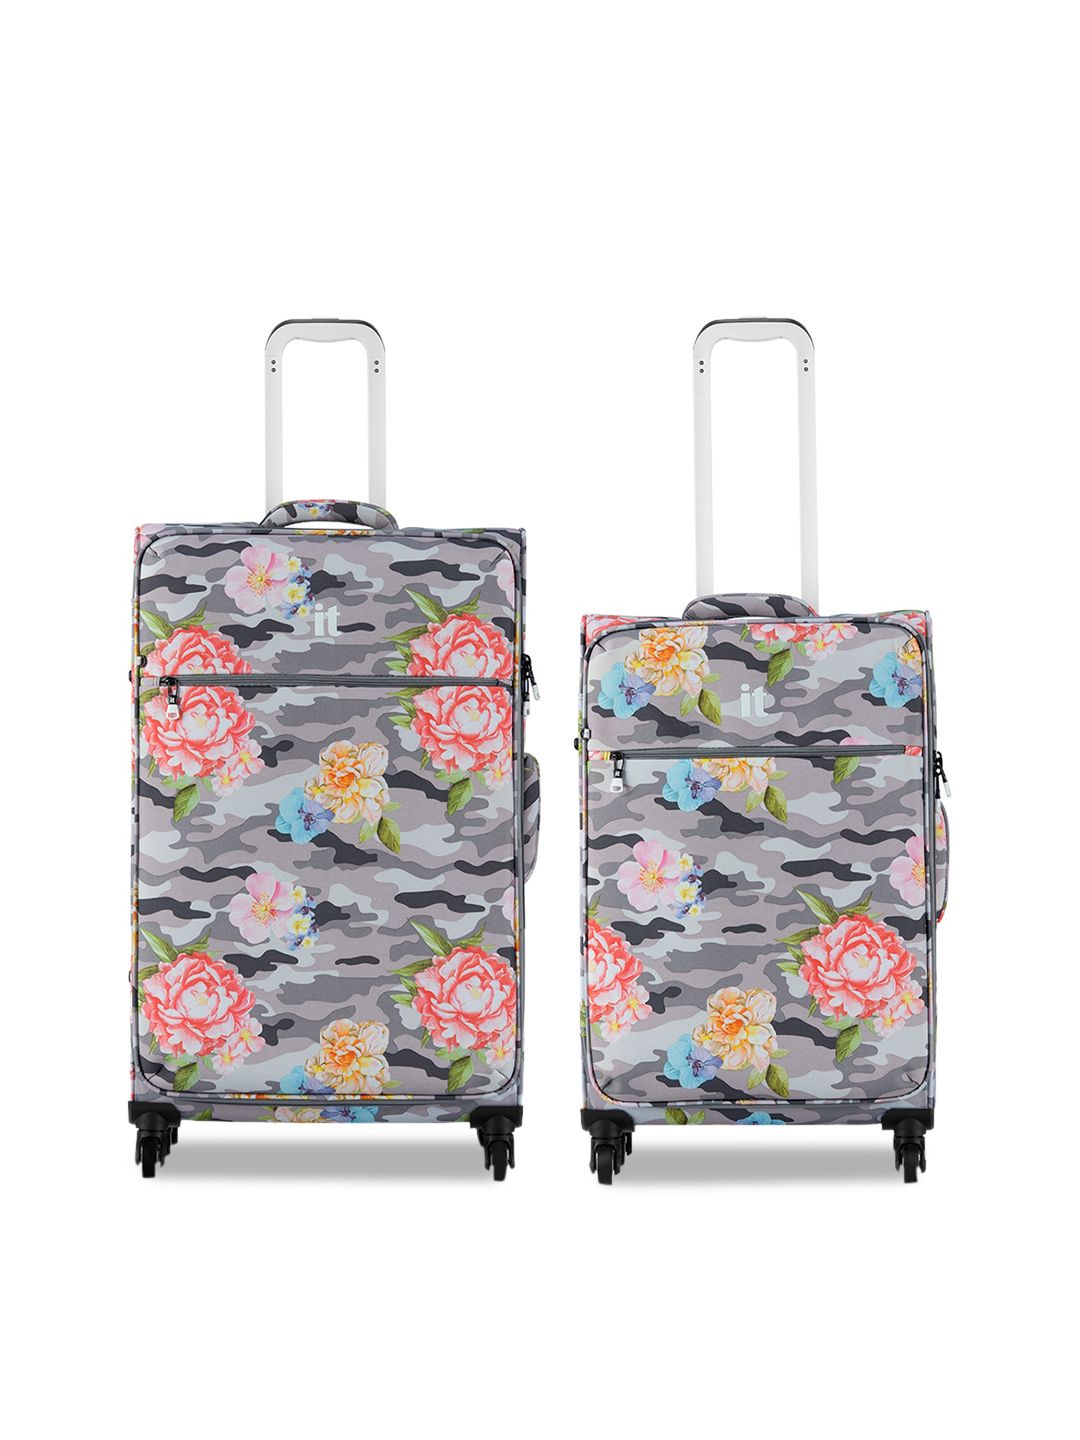 IT luggage Set Of 2 Grey & Pink Printed 360-Degree Rotation Cabin Trolley Bag Price in India